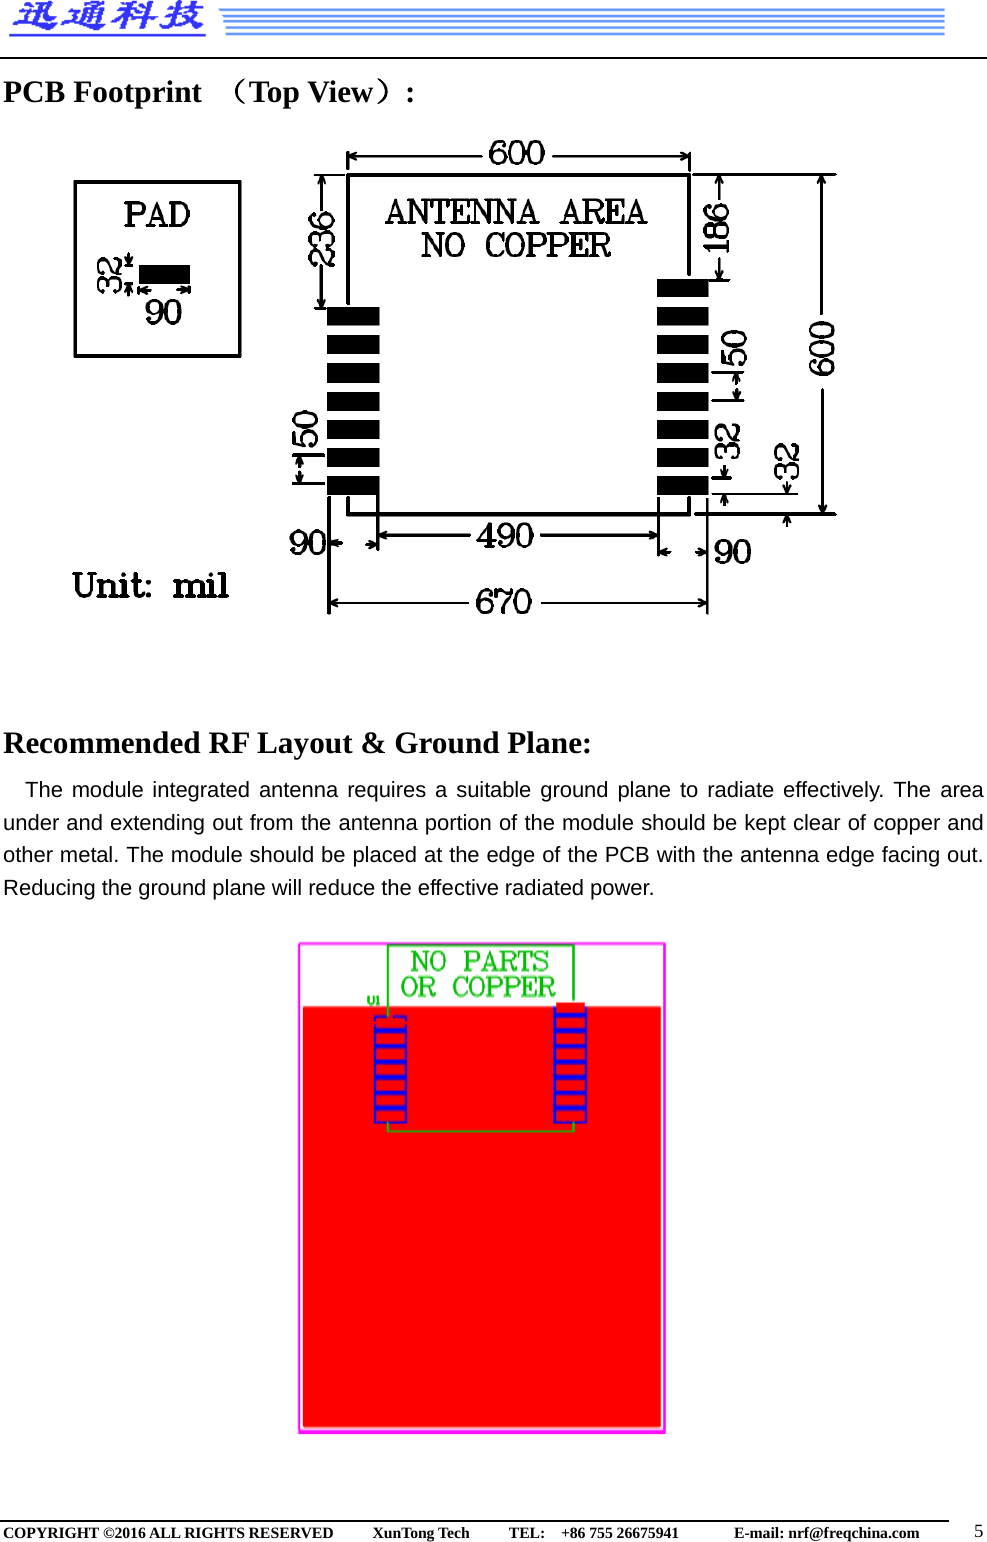  PCB Footprint （Top View）:                   Recommended RF Layout &amp; Ground Plane: The module integrated antenna requires a suitable ground plane to radiate effectively. The area under and extending out from the antenna portion of the module should be kept clear of copper and other metal. The module should be placed at the edge of the PCB with the antenna edge facing out. Reducing the ground plane will reduce the effective radiated power.                     COPYRIGHT ©2016 ALL RIGHTS RESERVED      XunTong Tech     TEL:  +86 755 26675941        E-mail: nrf@freqchina.com   5 